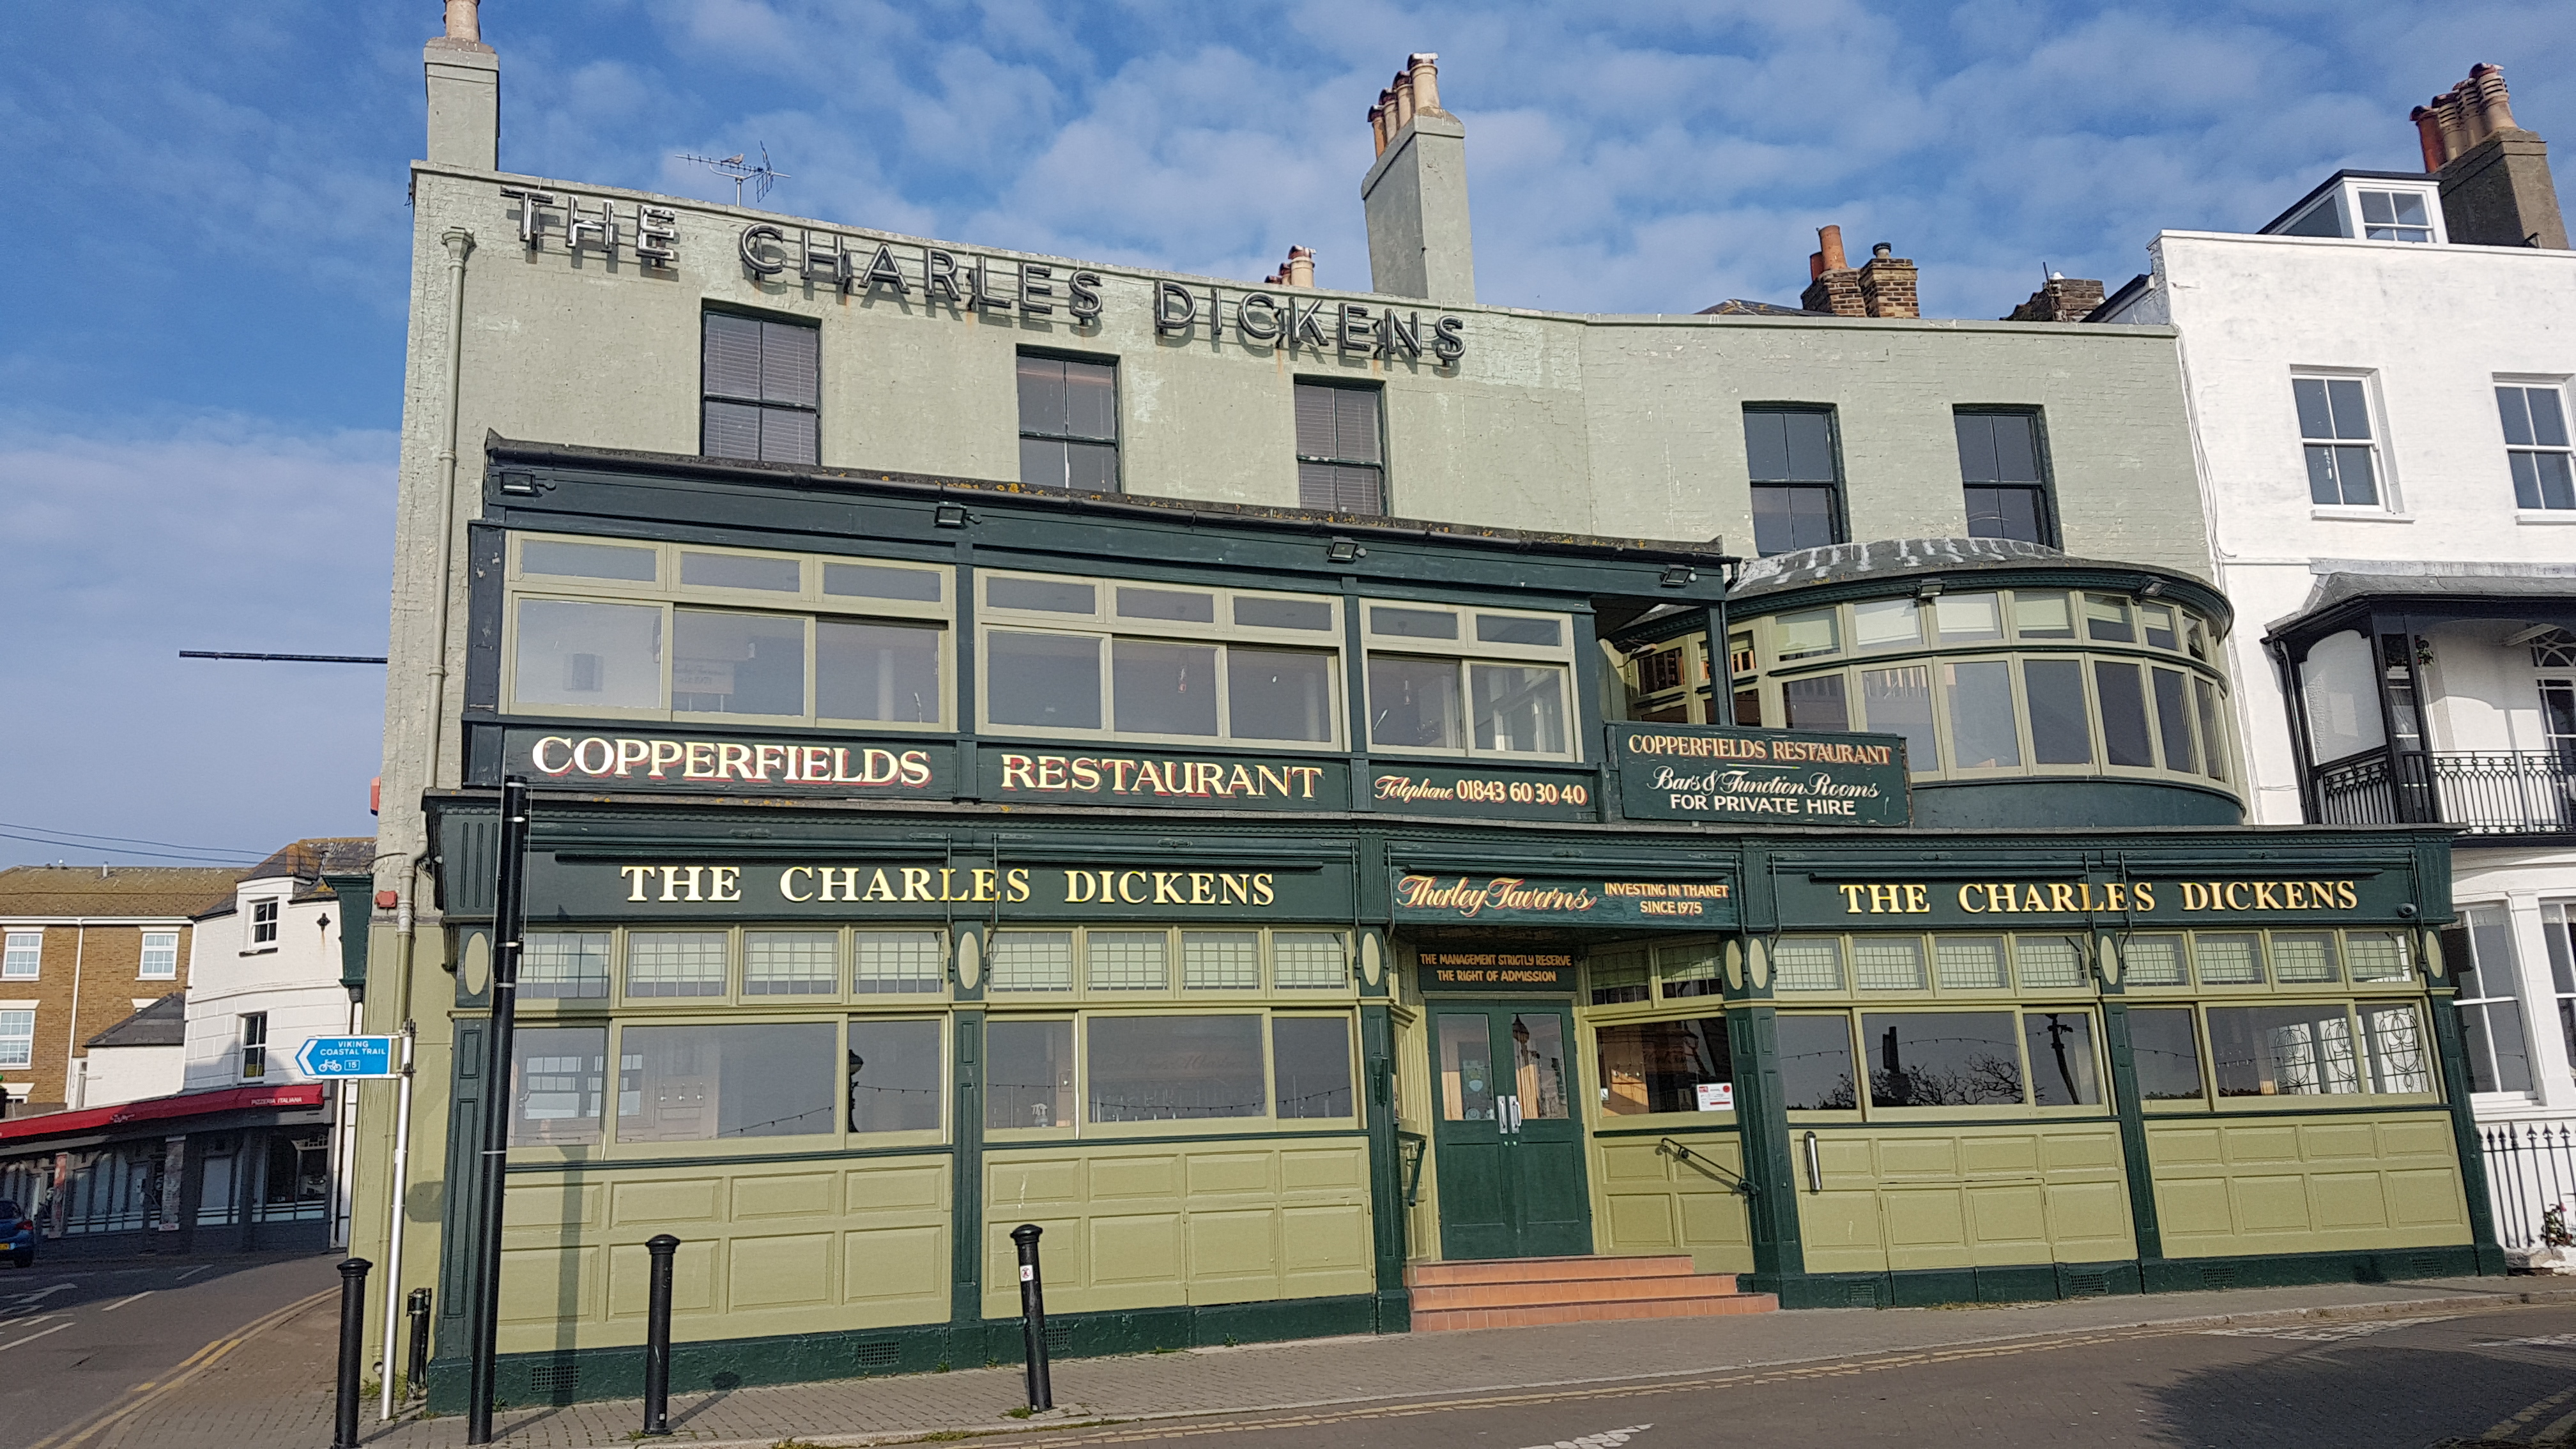 CHARLES DICKENS PUB AND DINING ROOMS